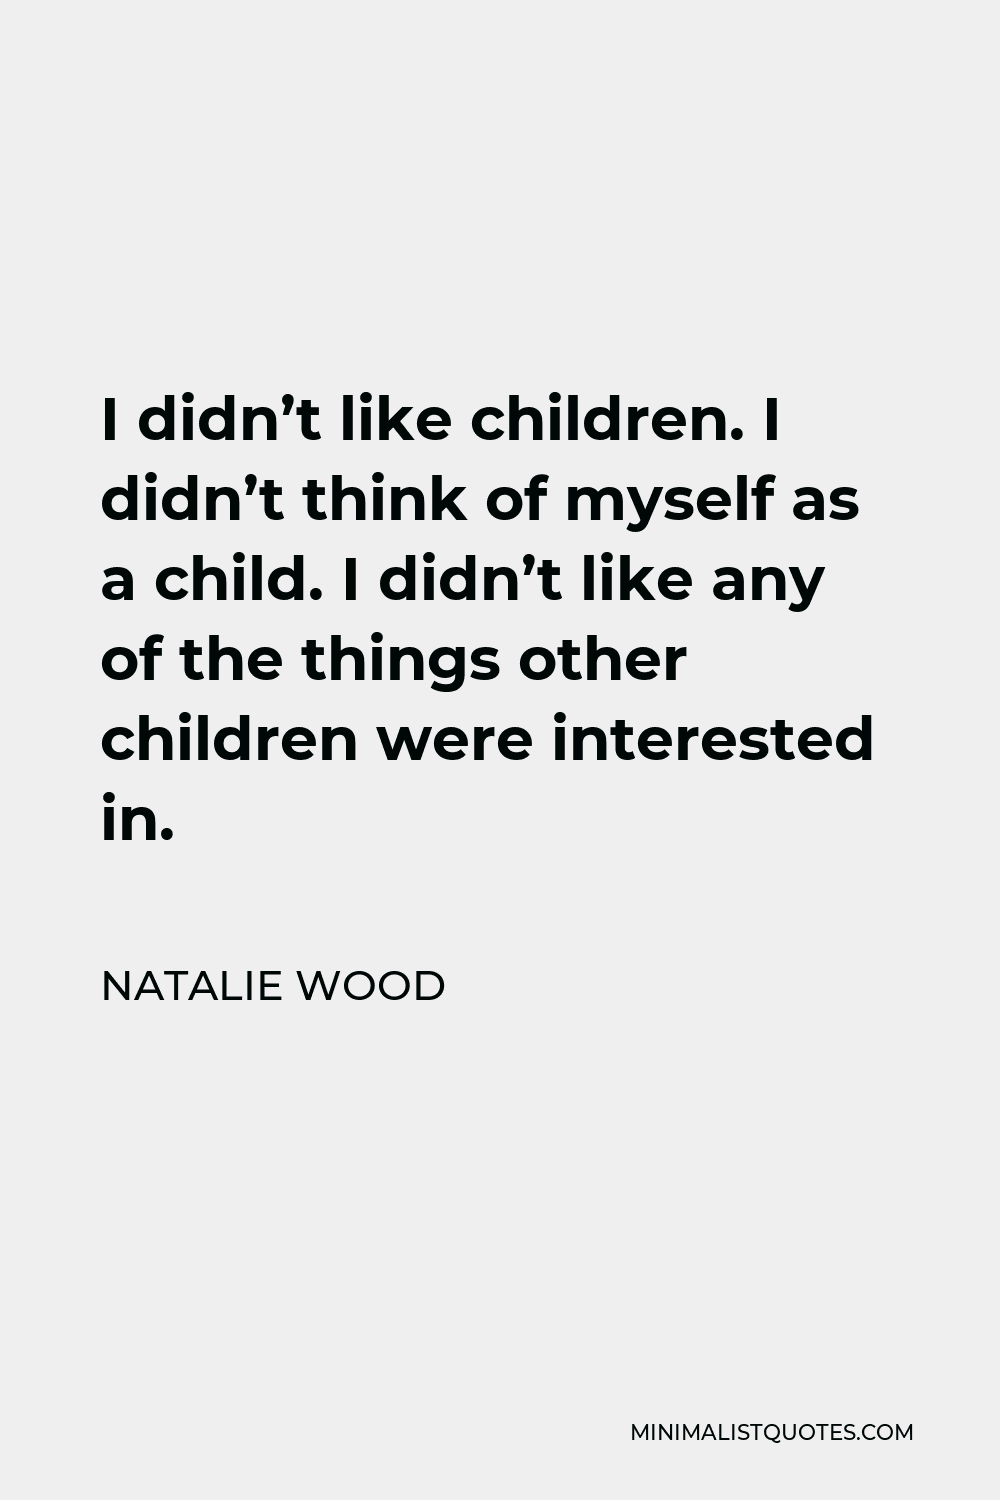 Natalie Wood Quote - I didn’t like children. I didn’t think of myself as a child. I didn’t like any of the things other children were interested in.